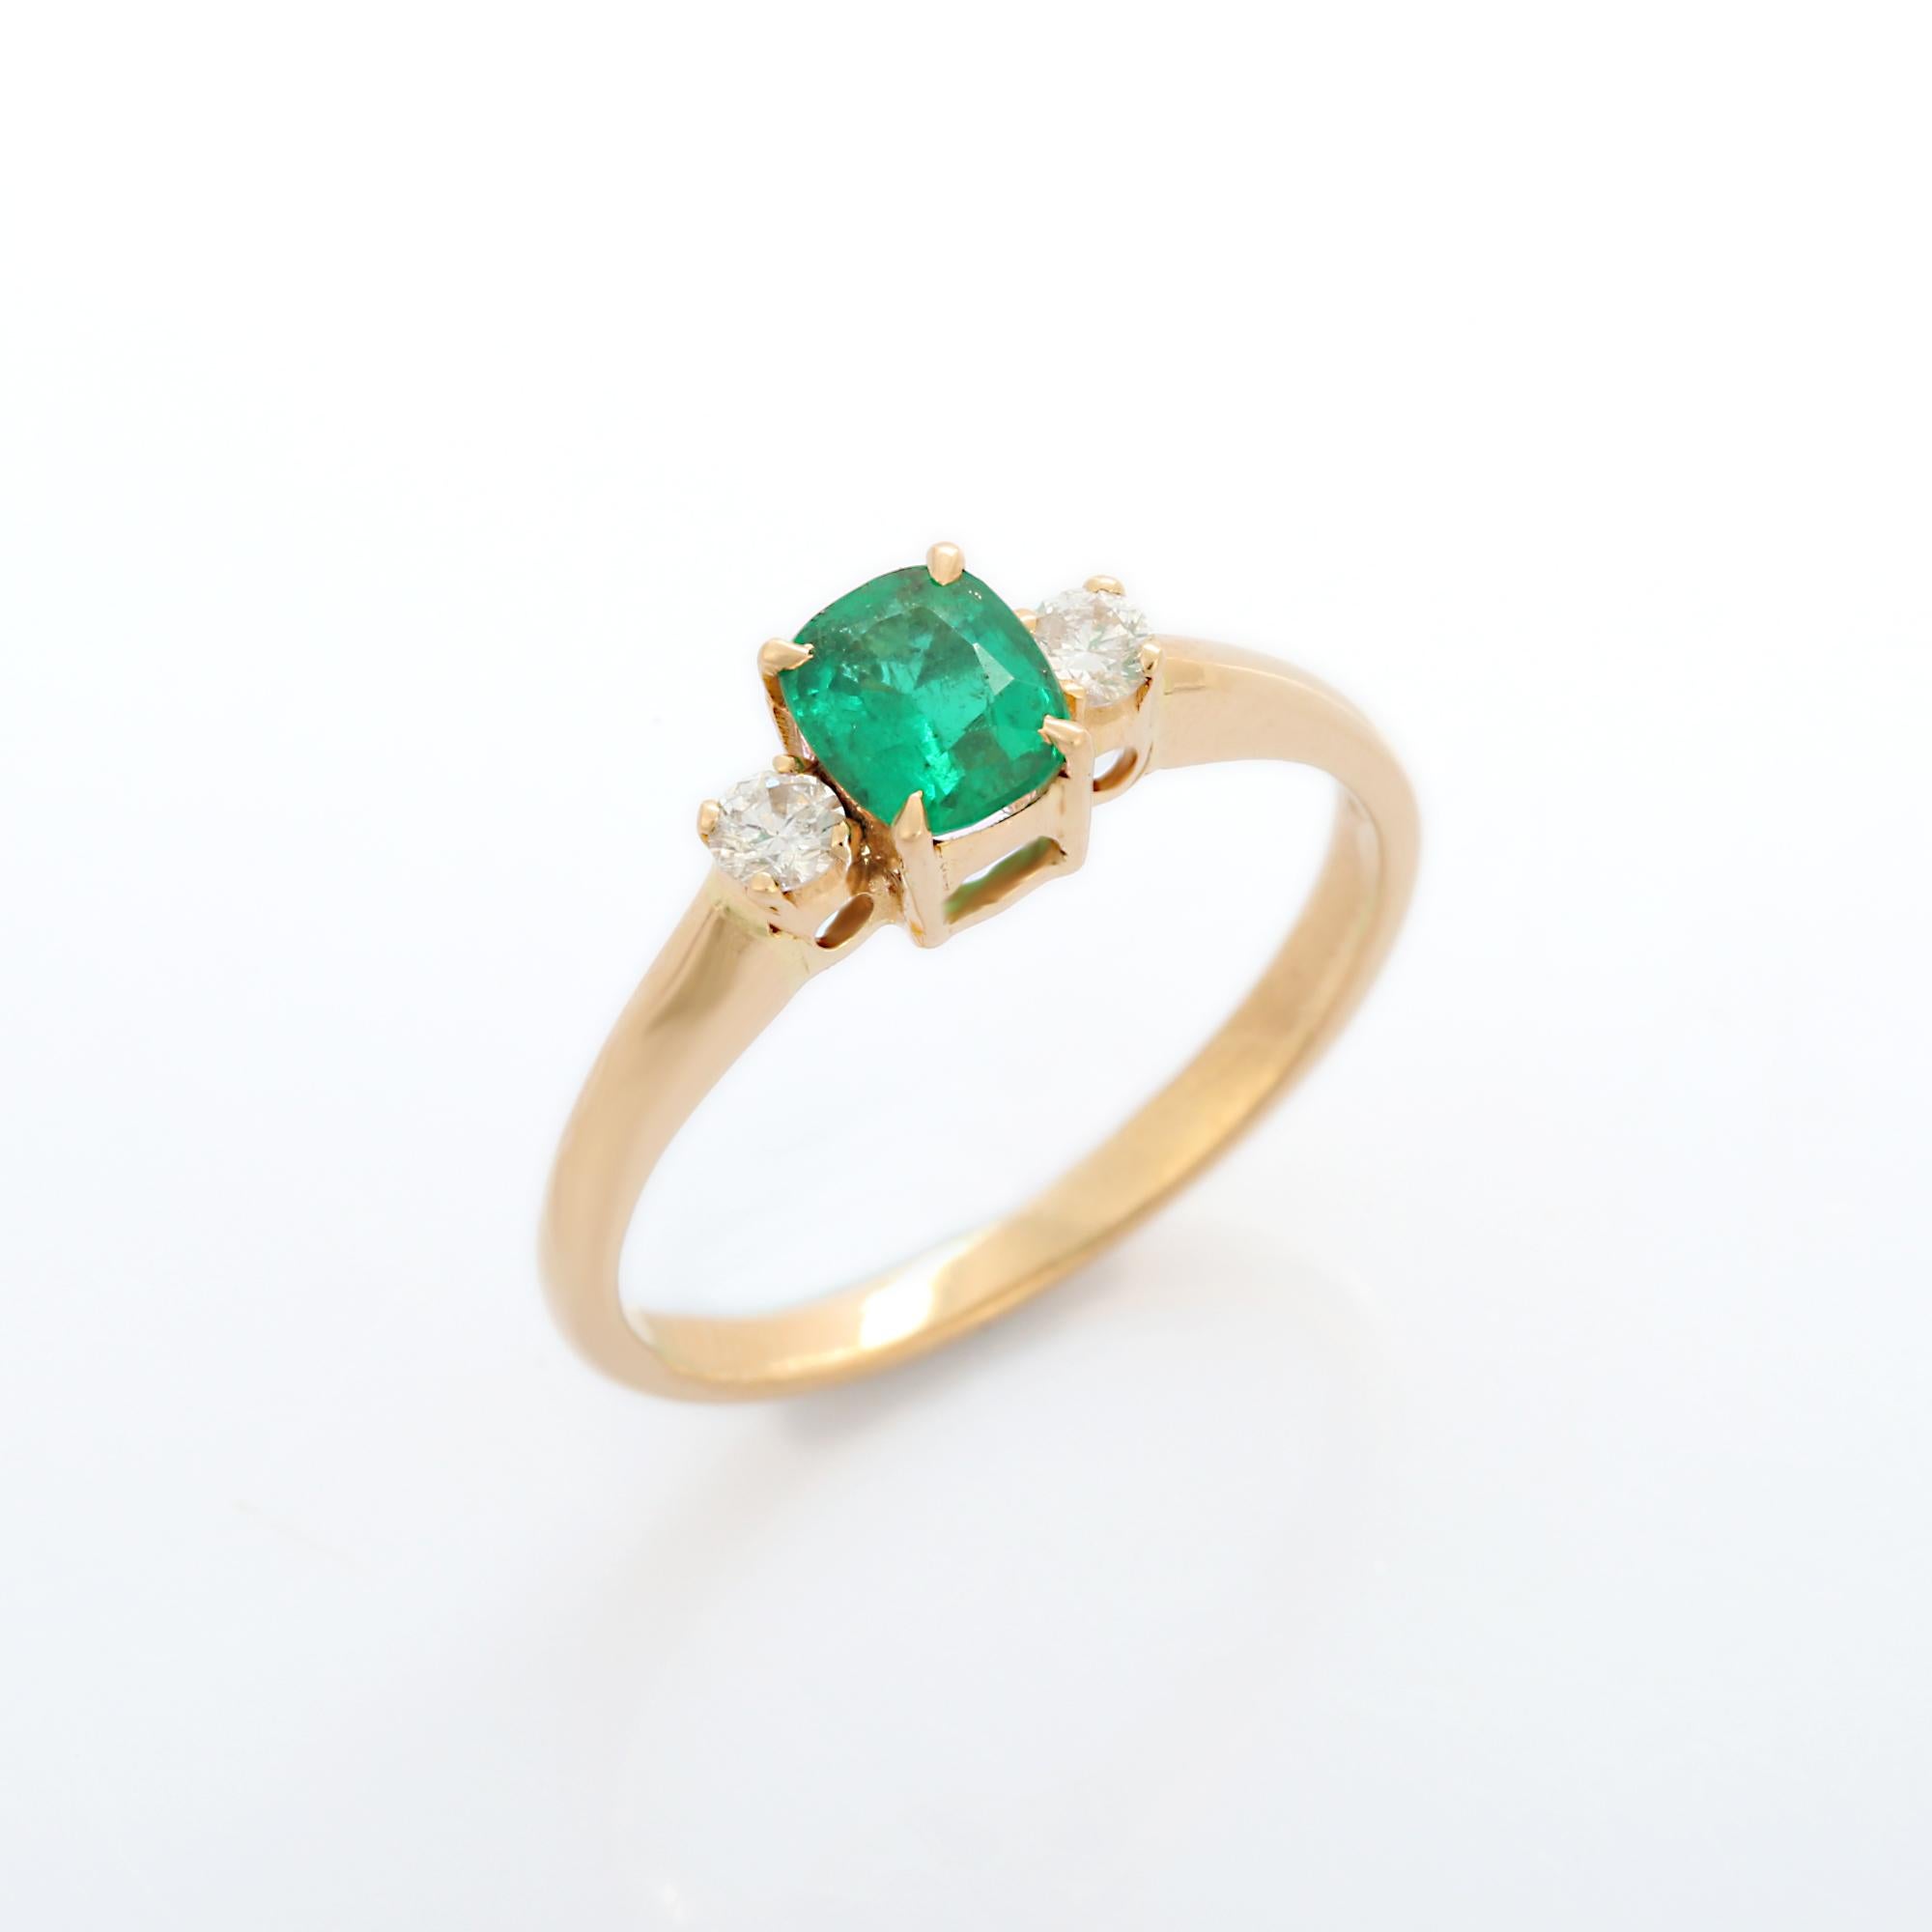 For Sale:  Emerald Gemstone Ring in 18k Solid Yellow Gold with Diamonds 8